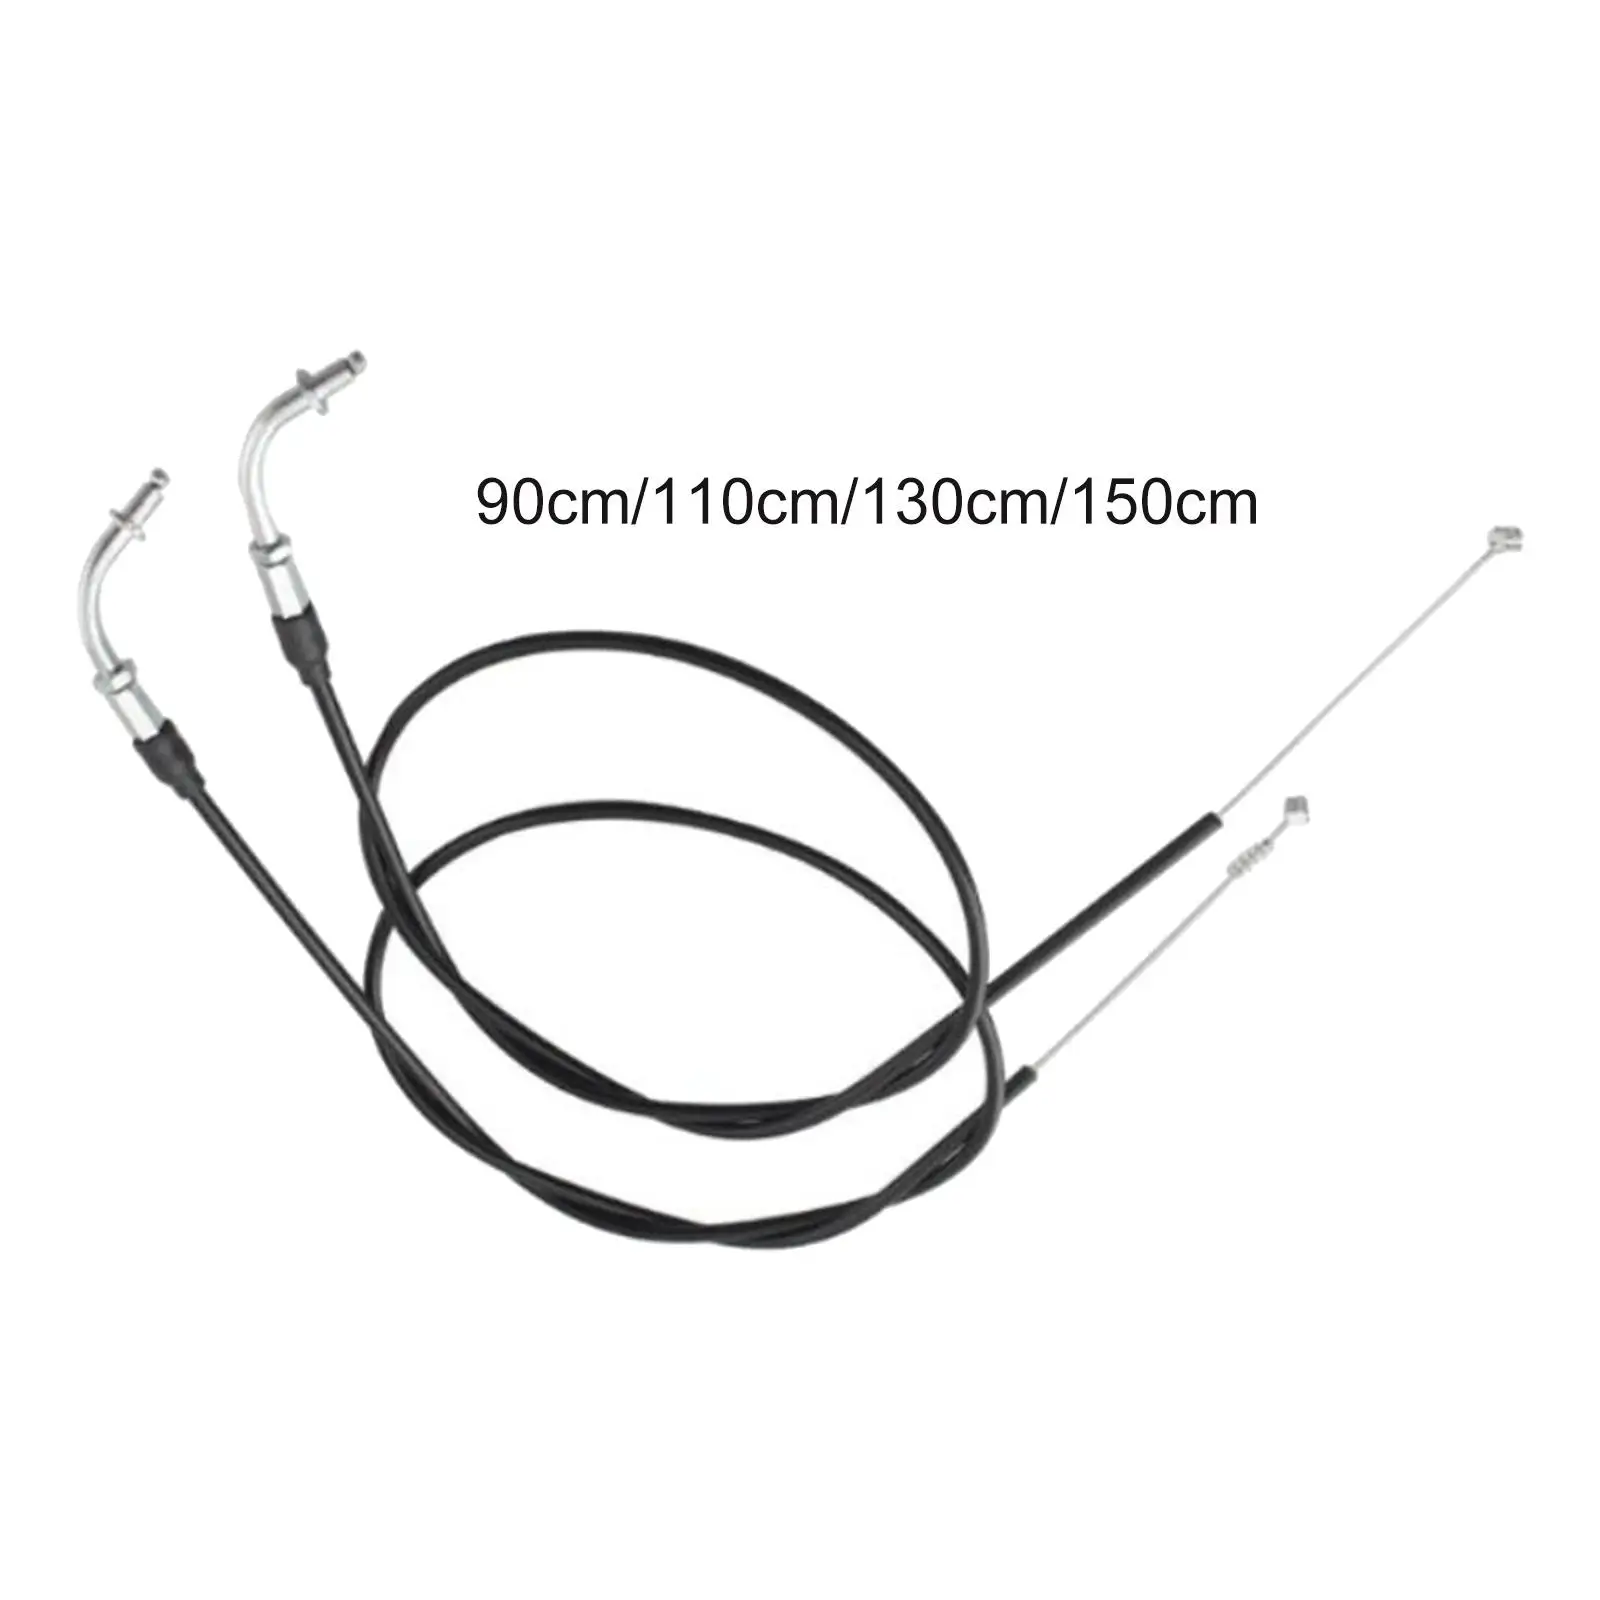 2 Pieces Motorcycle Throttle Cables Wire Accessories Supplies Black Modified Accelerator Cable Fit for    XL883 XL1200 x48